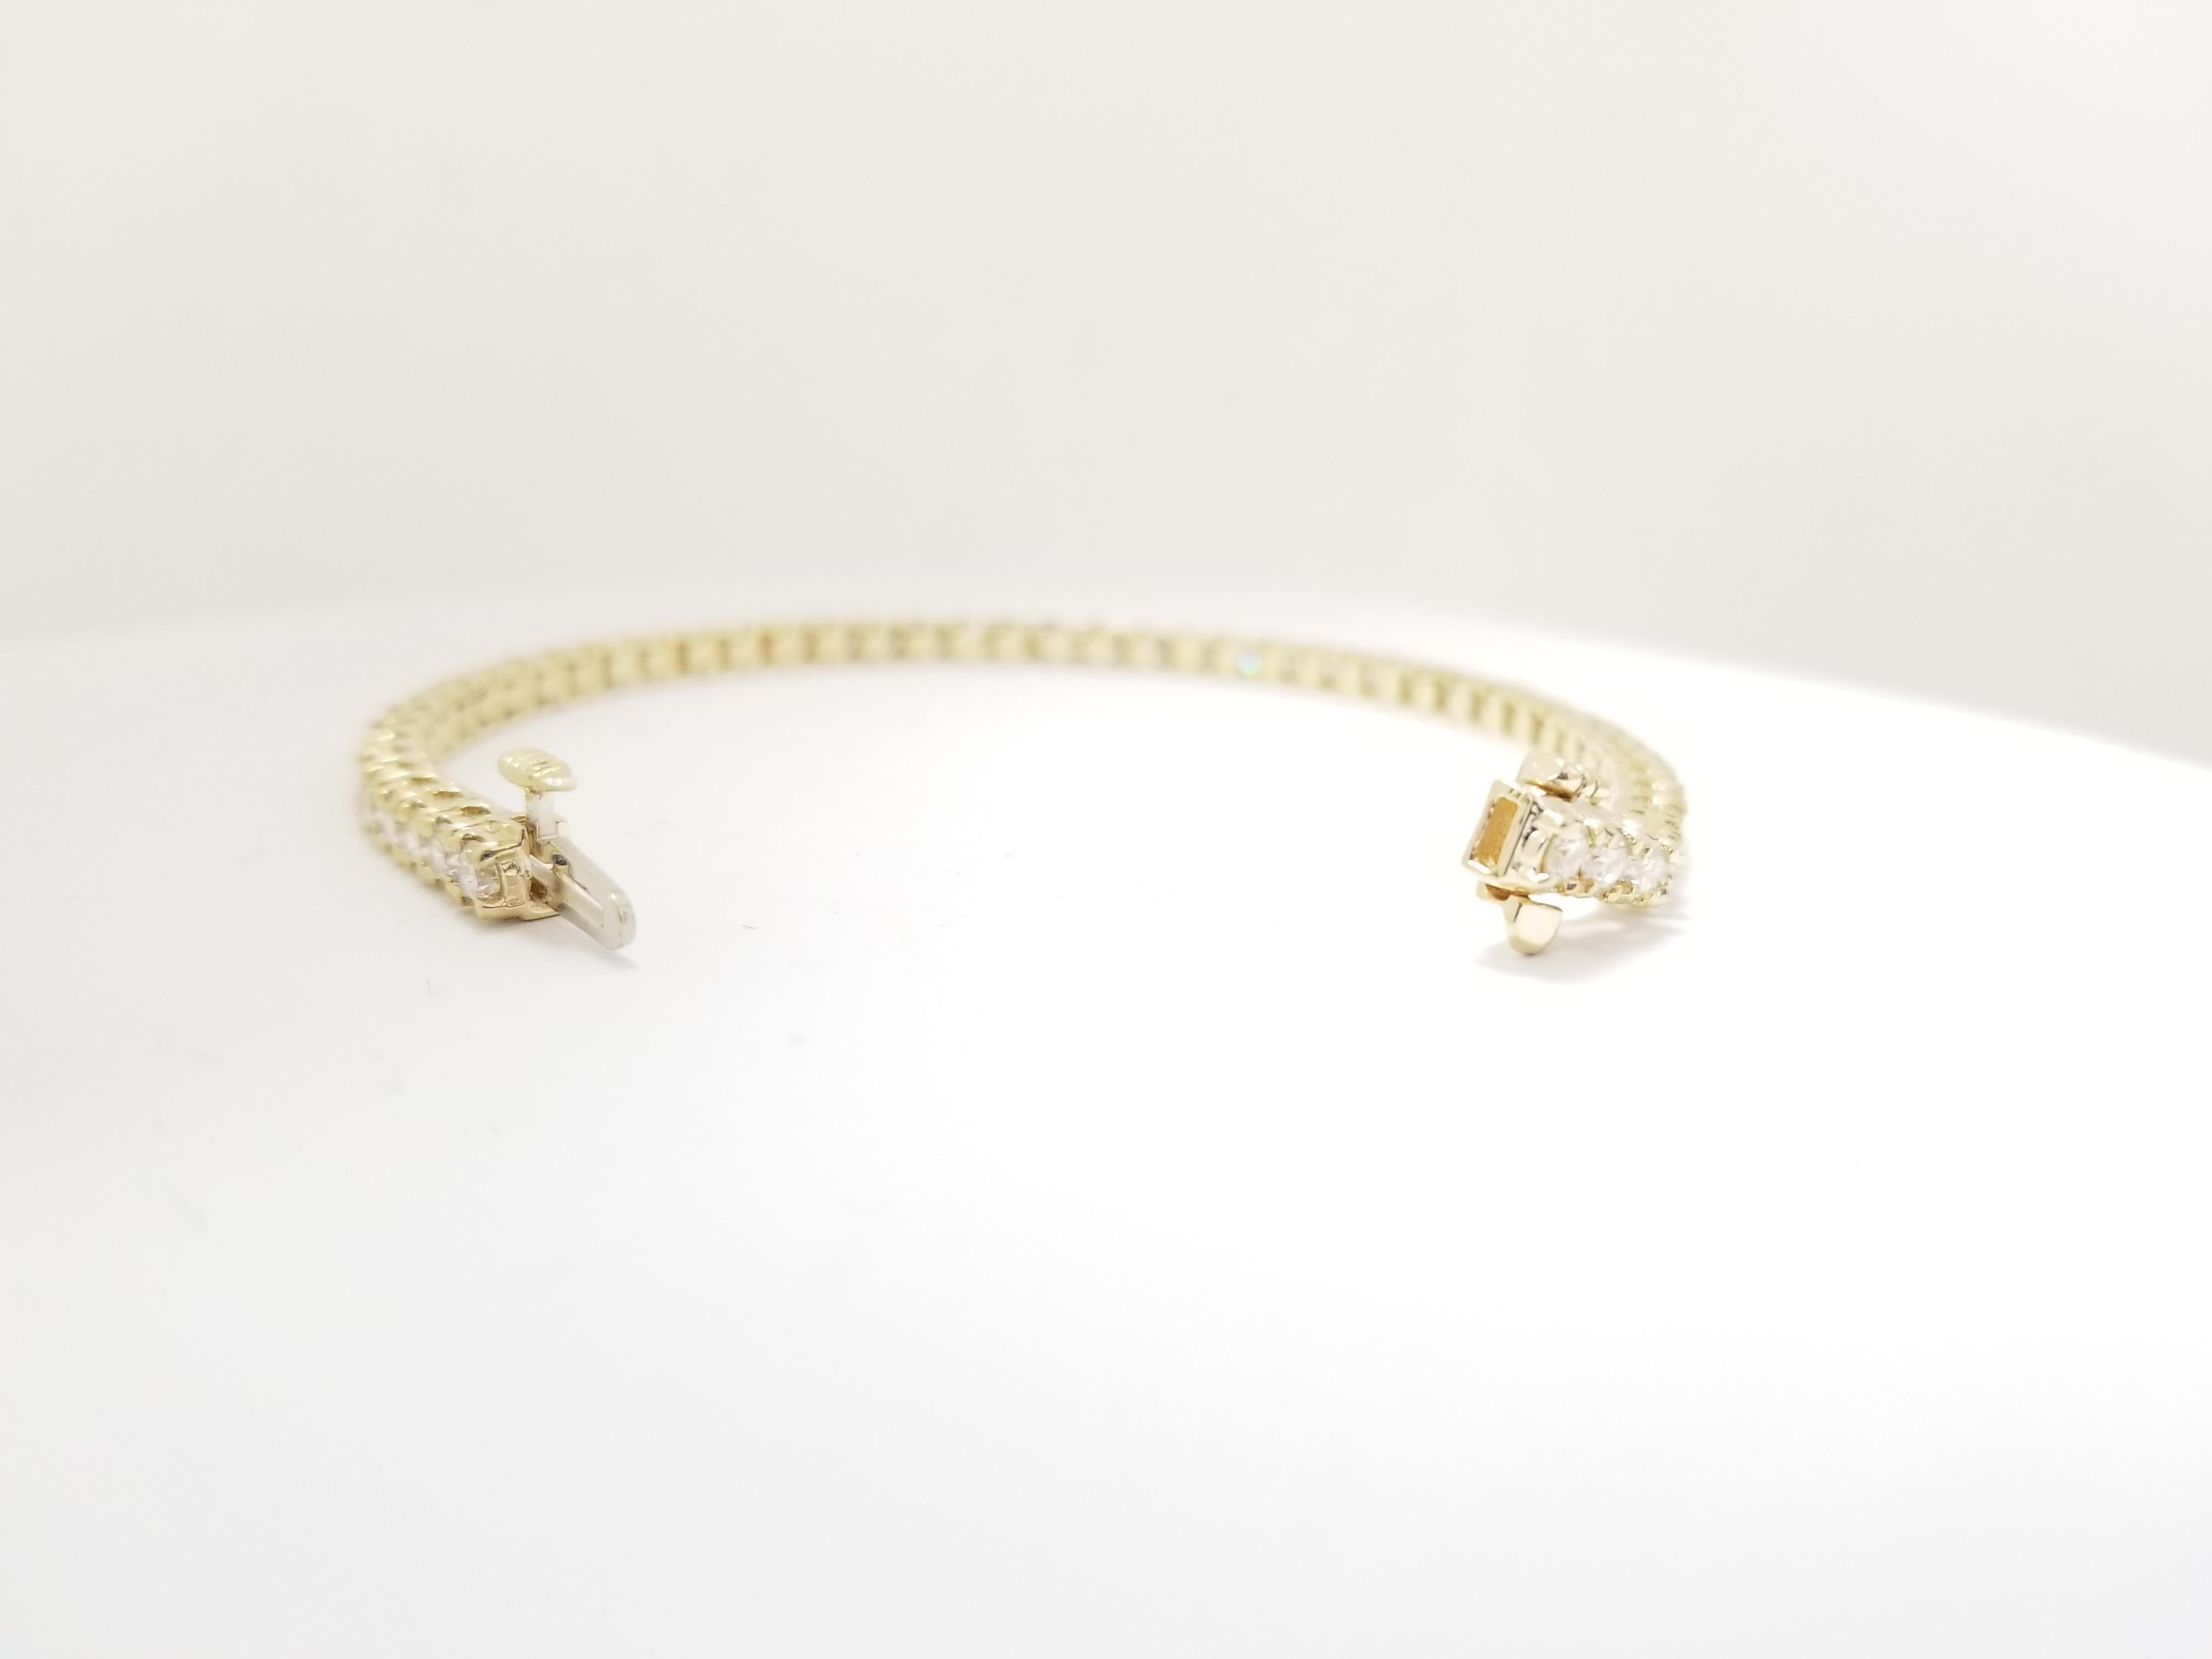 A quality tennis bracelet, round-brilliant cut diamonds. set on 14k yellow gold. each stone is set in a classic four-prong style for maximum light brilliance.
This bracelet is designed for smaller wrist, it has a better fit overall. 6 inch length. 